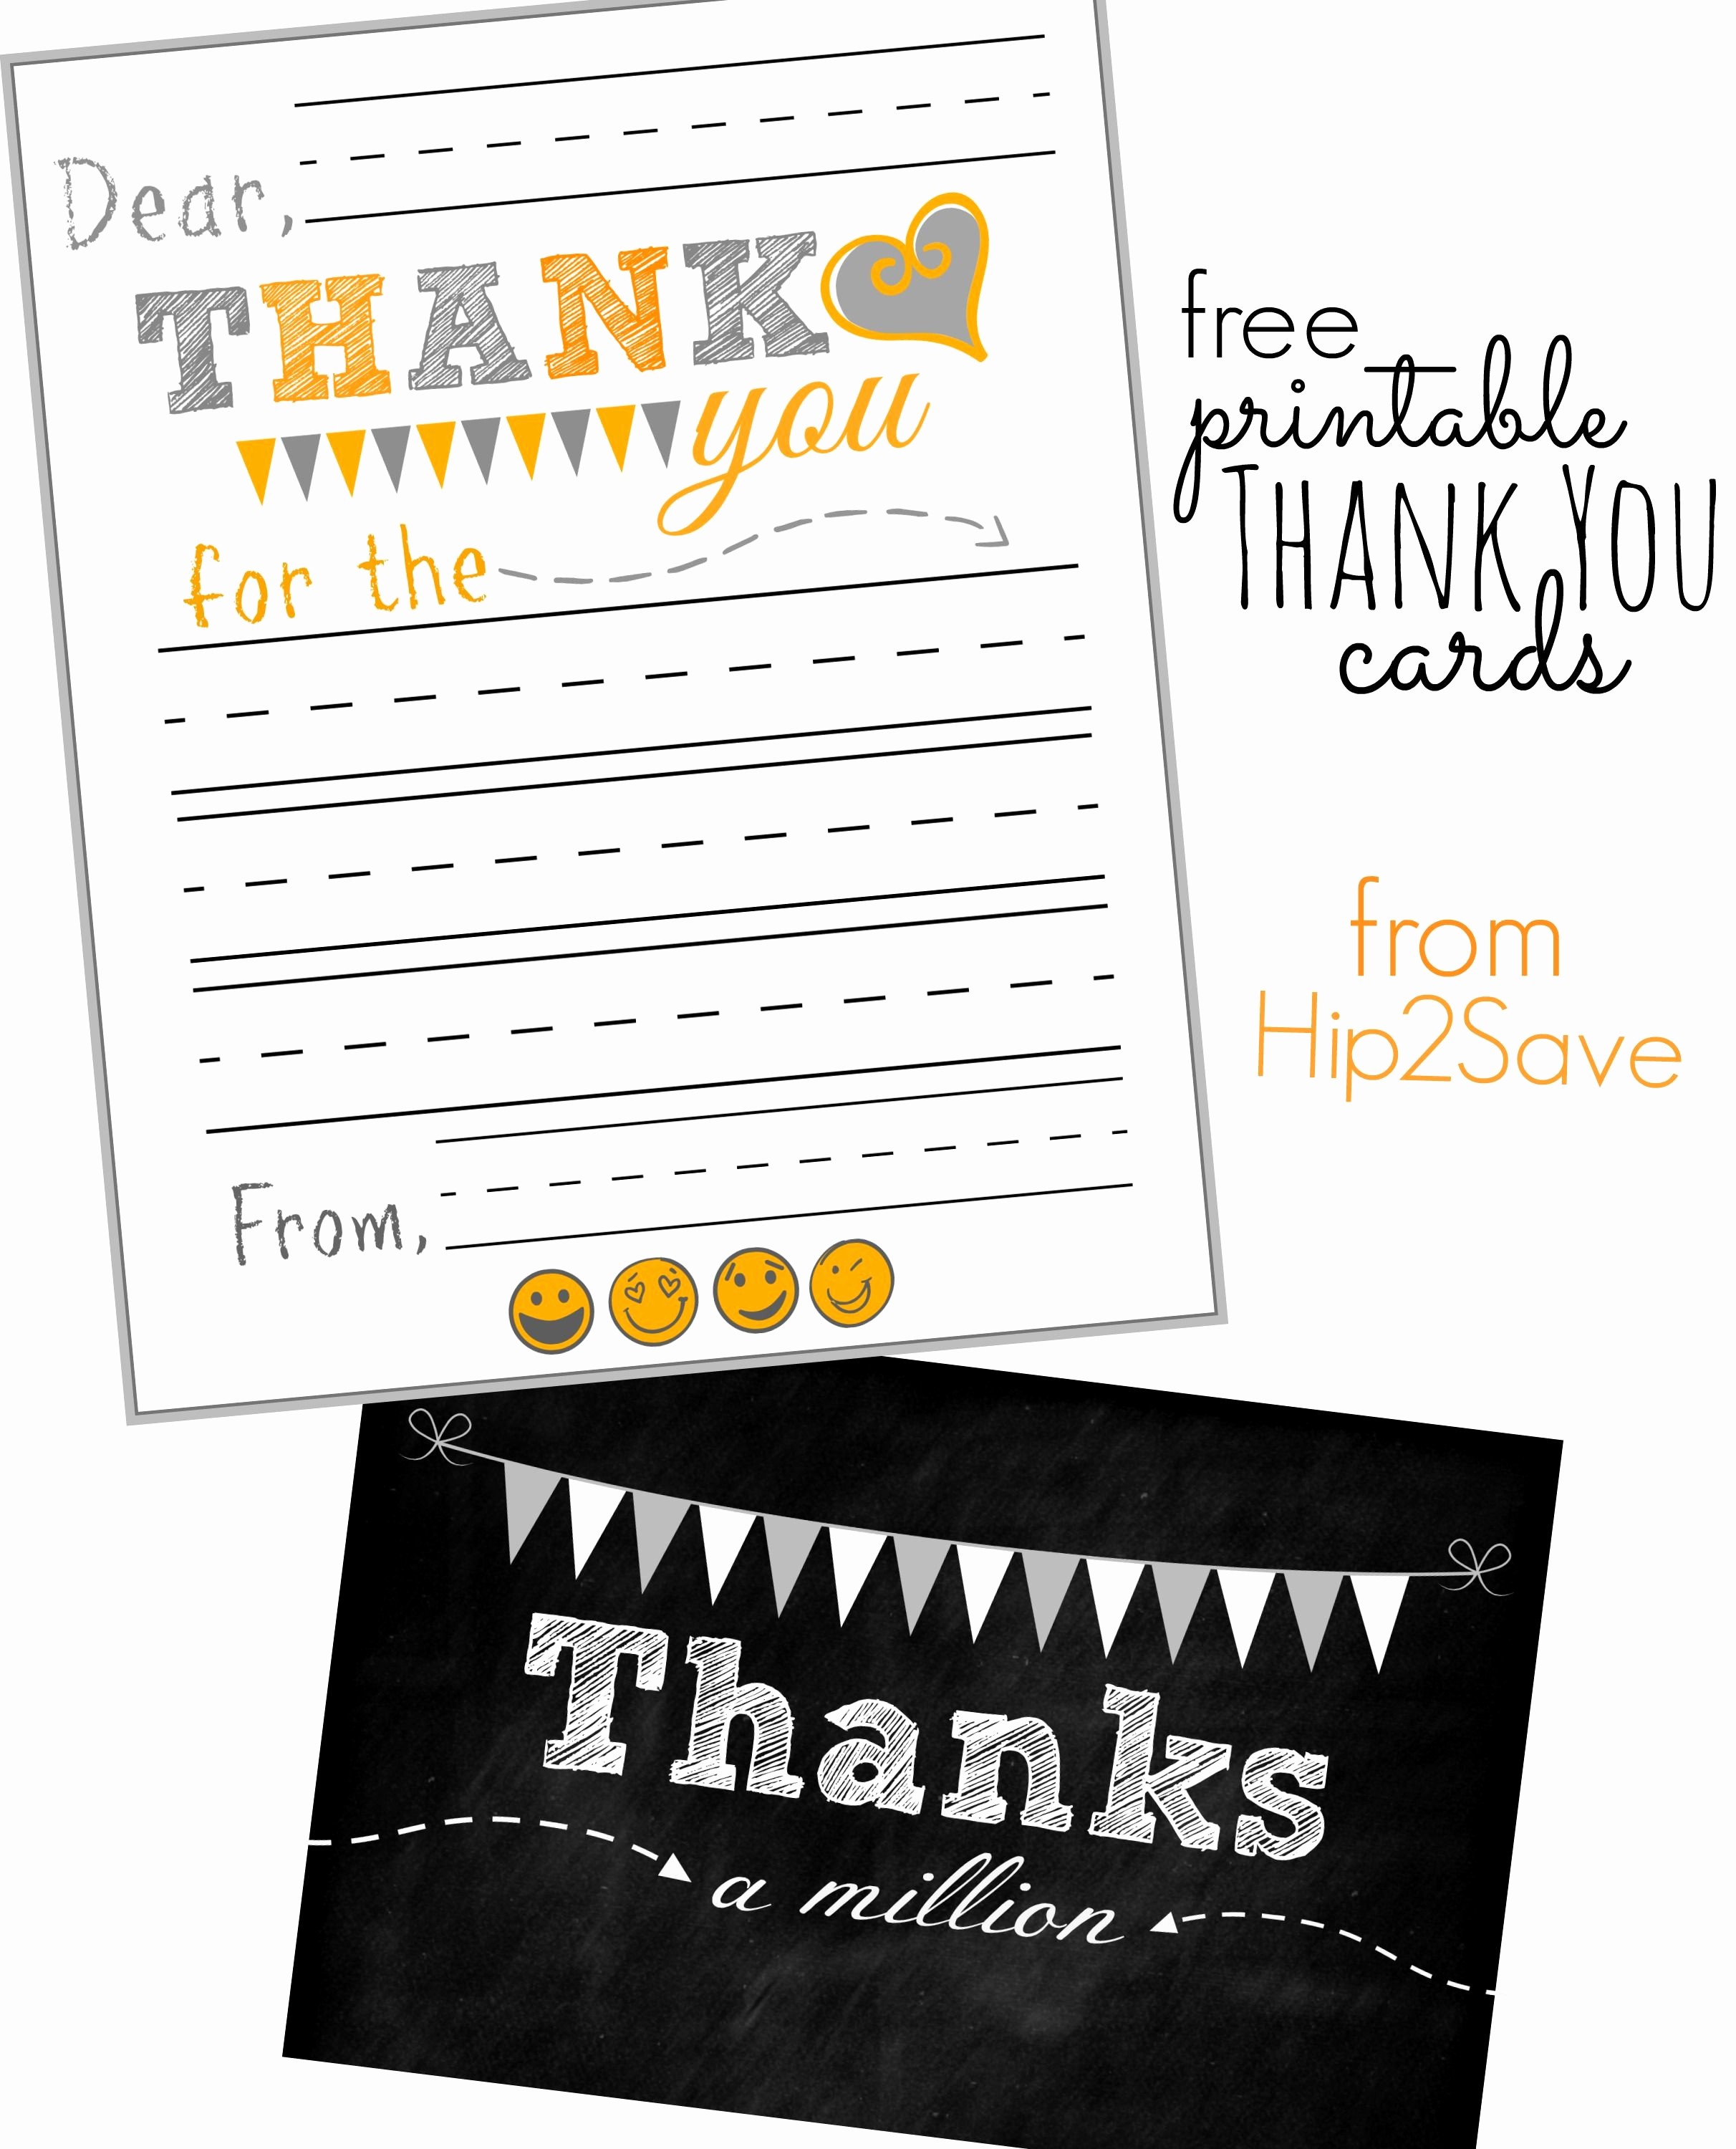 Thank You Note Card Template Lovely Free Printable Thank You Cards Printables